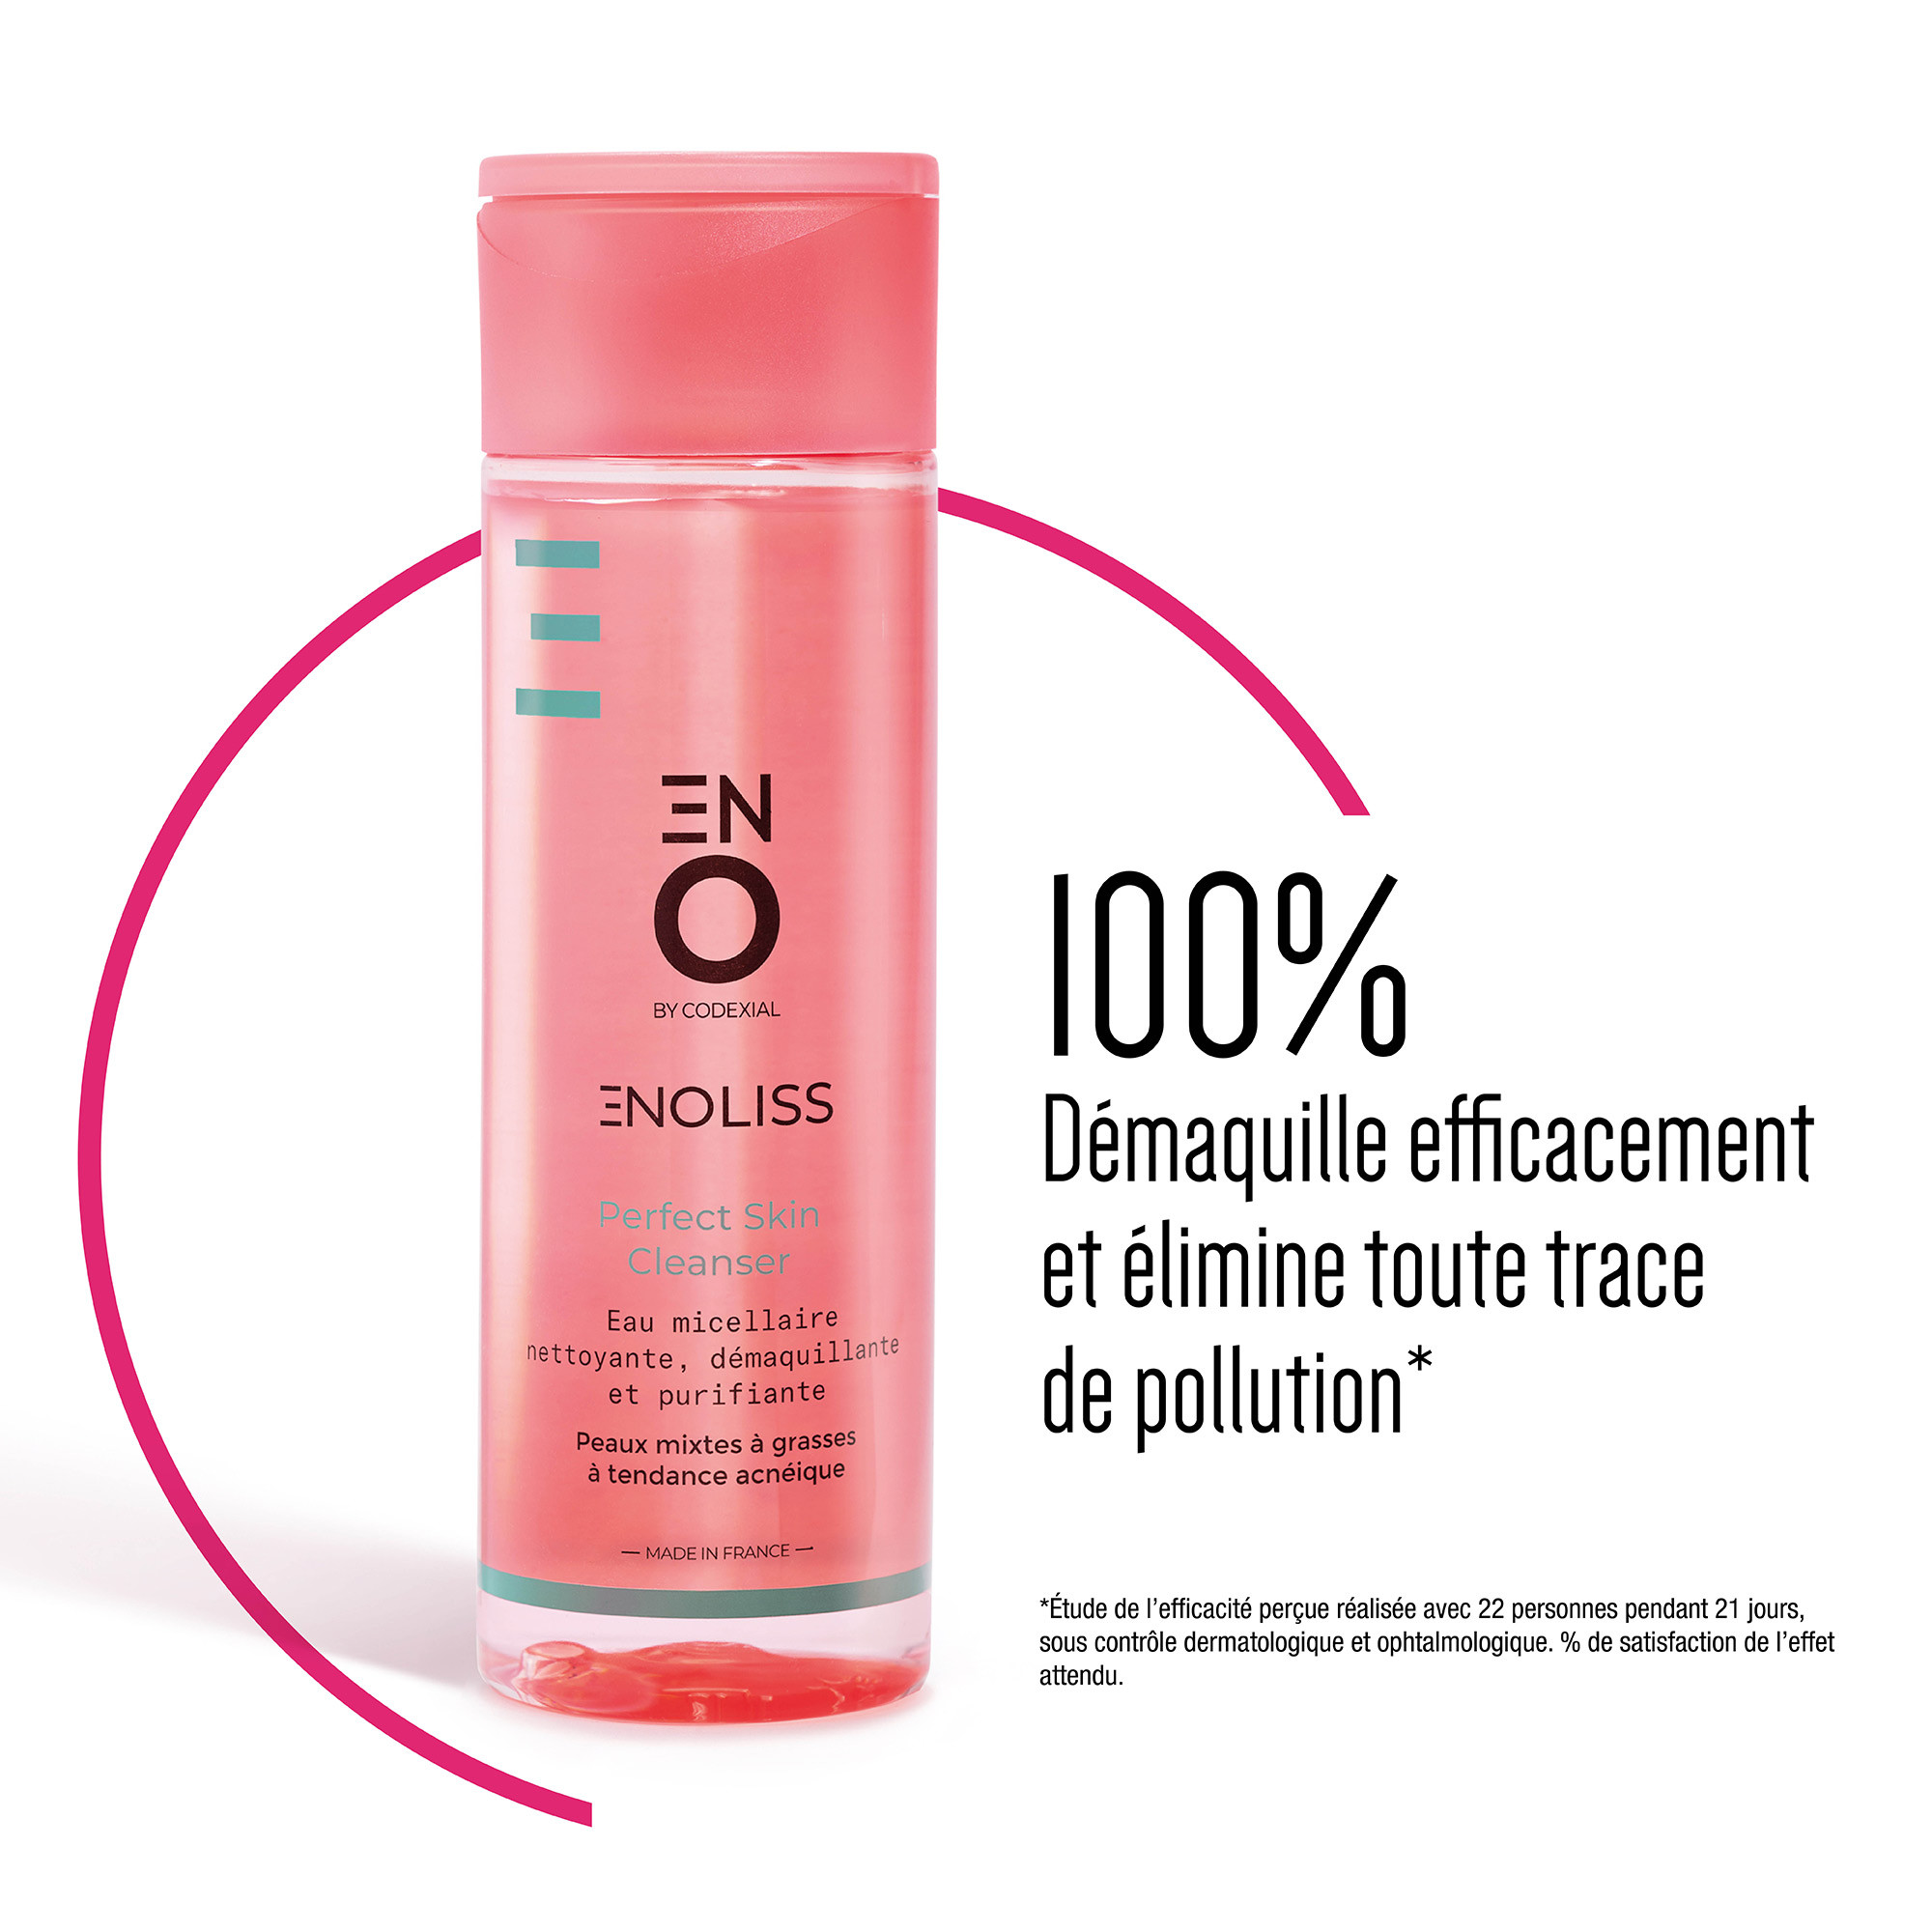 Enoliss Perfect Skin Cleanser-Image4